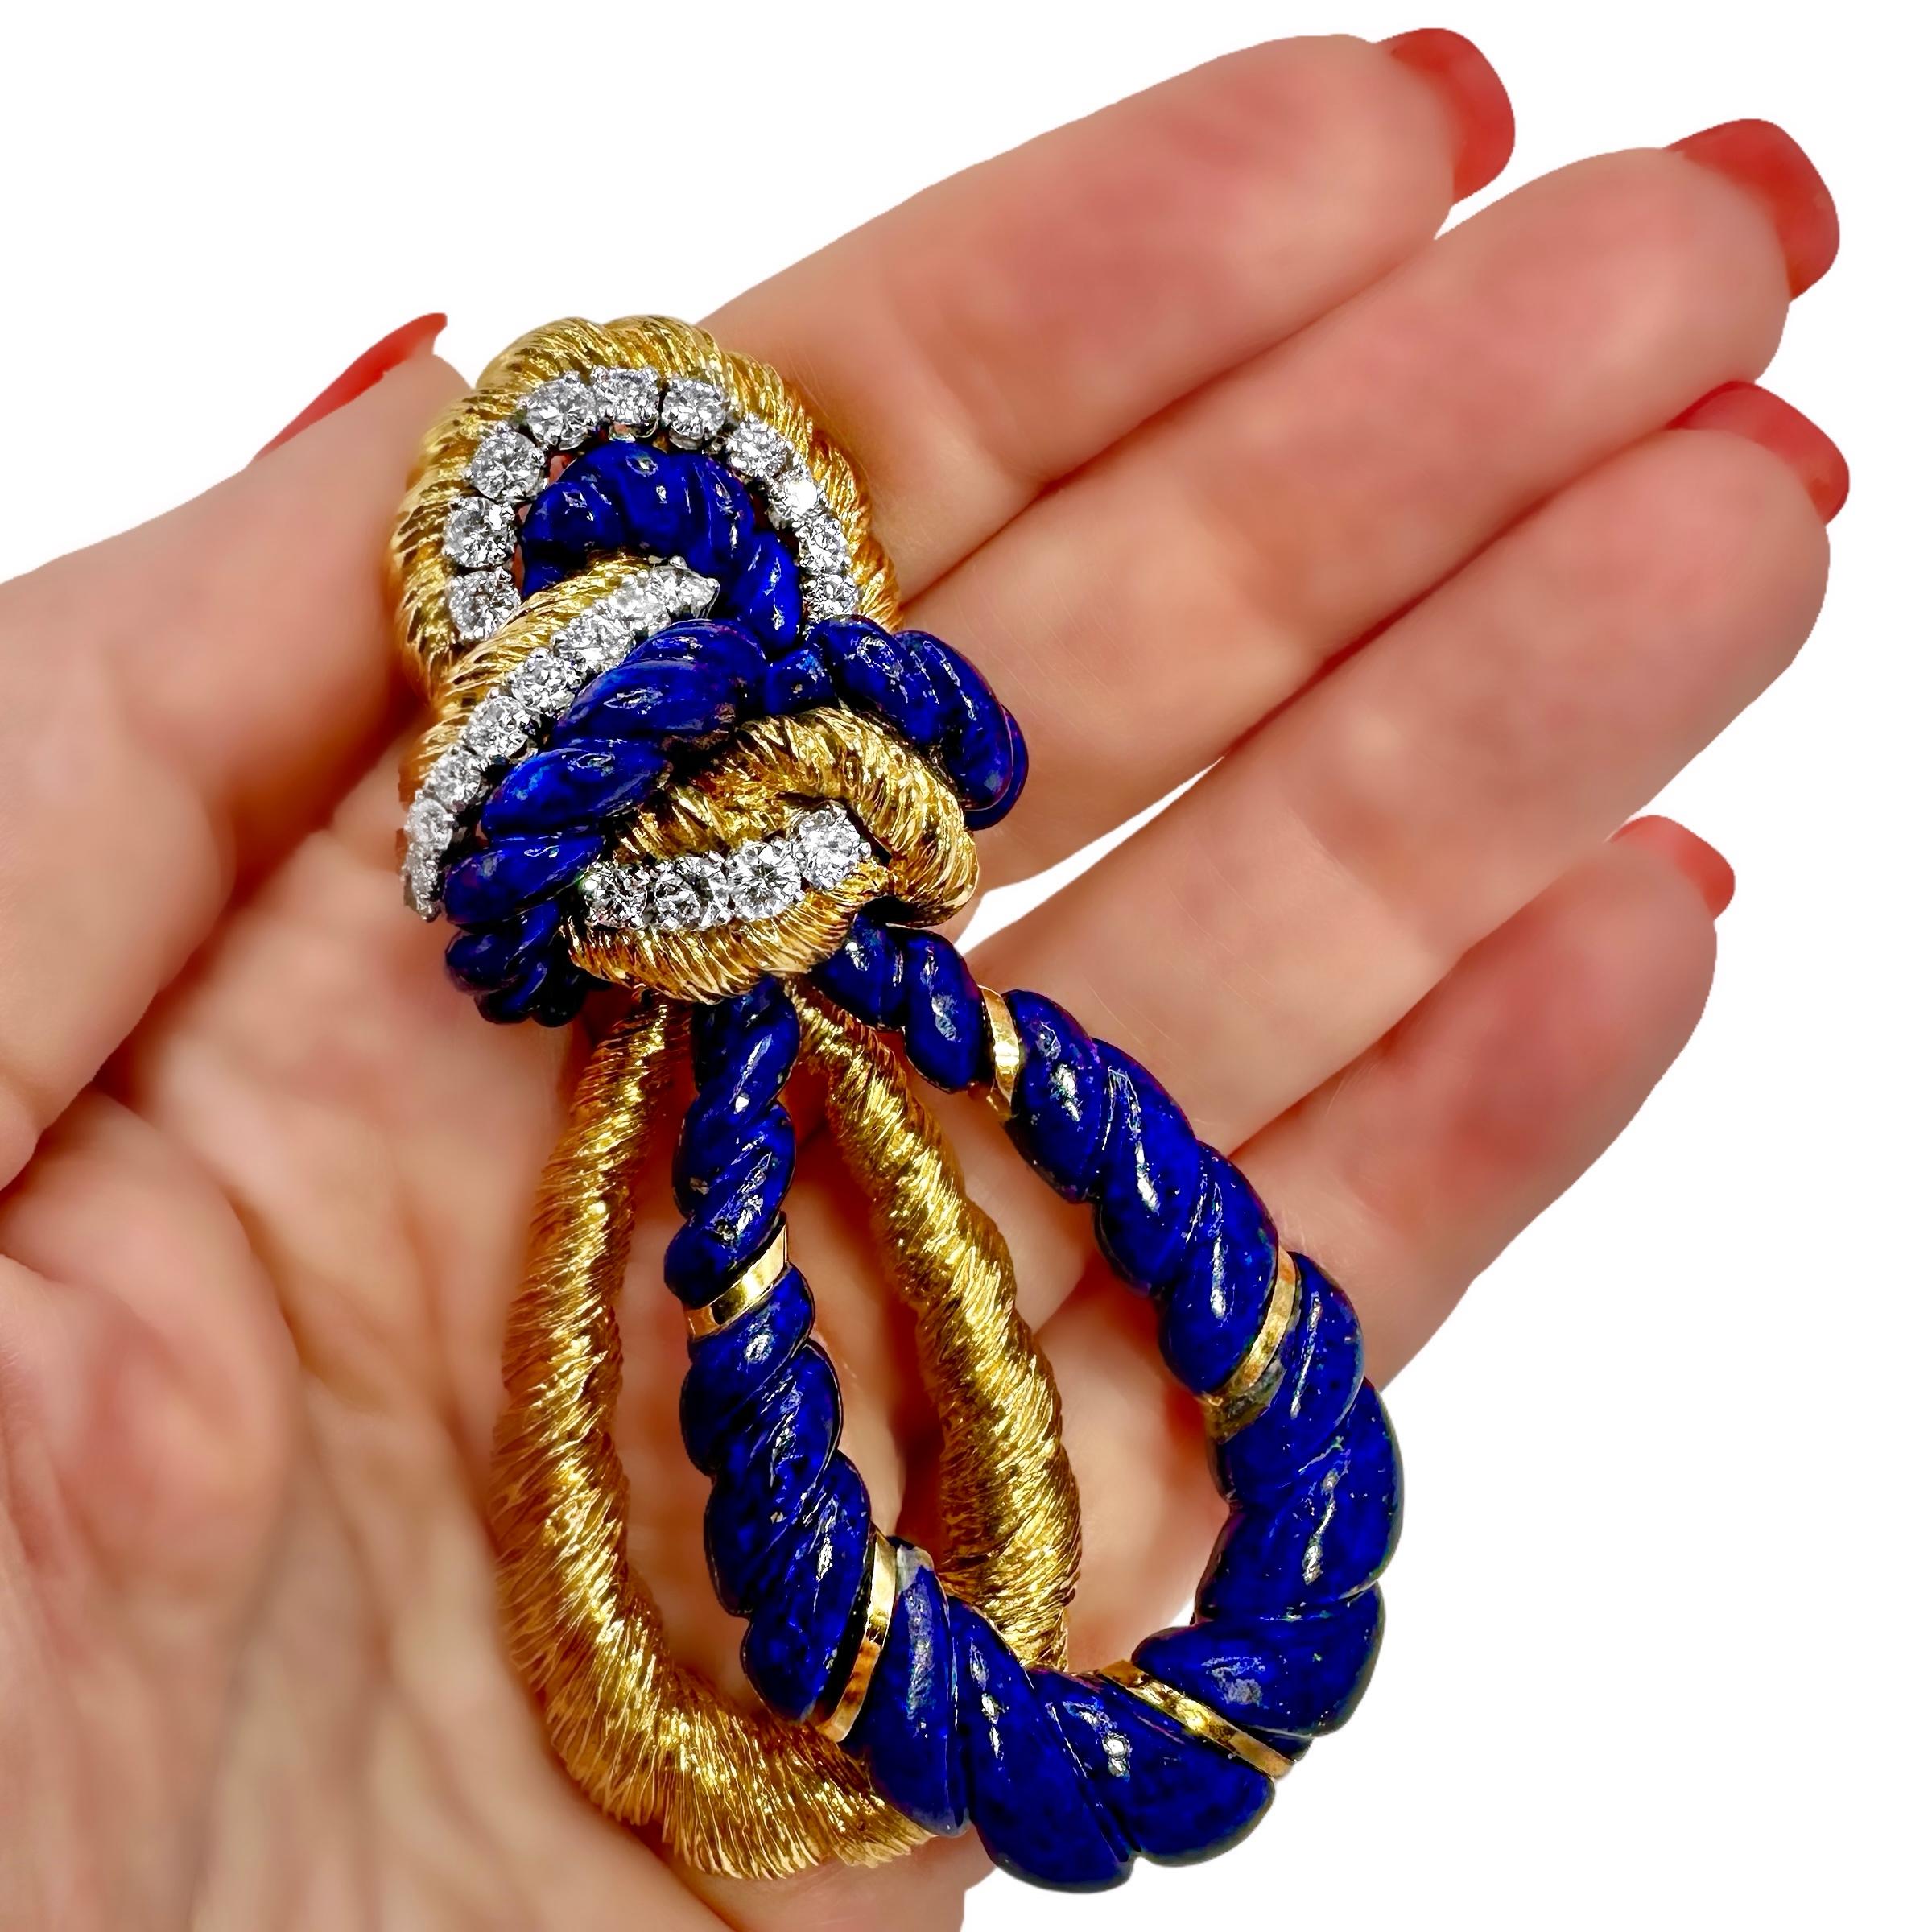 Wander France Yellow Gold Knot Brooch with Diamonds and Lapis Lazuli For Sale 4